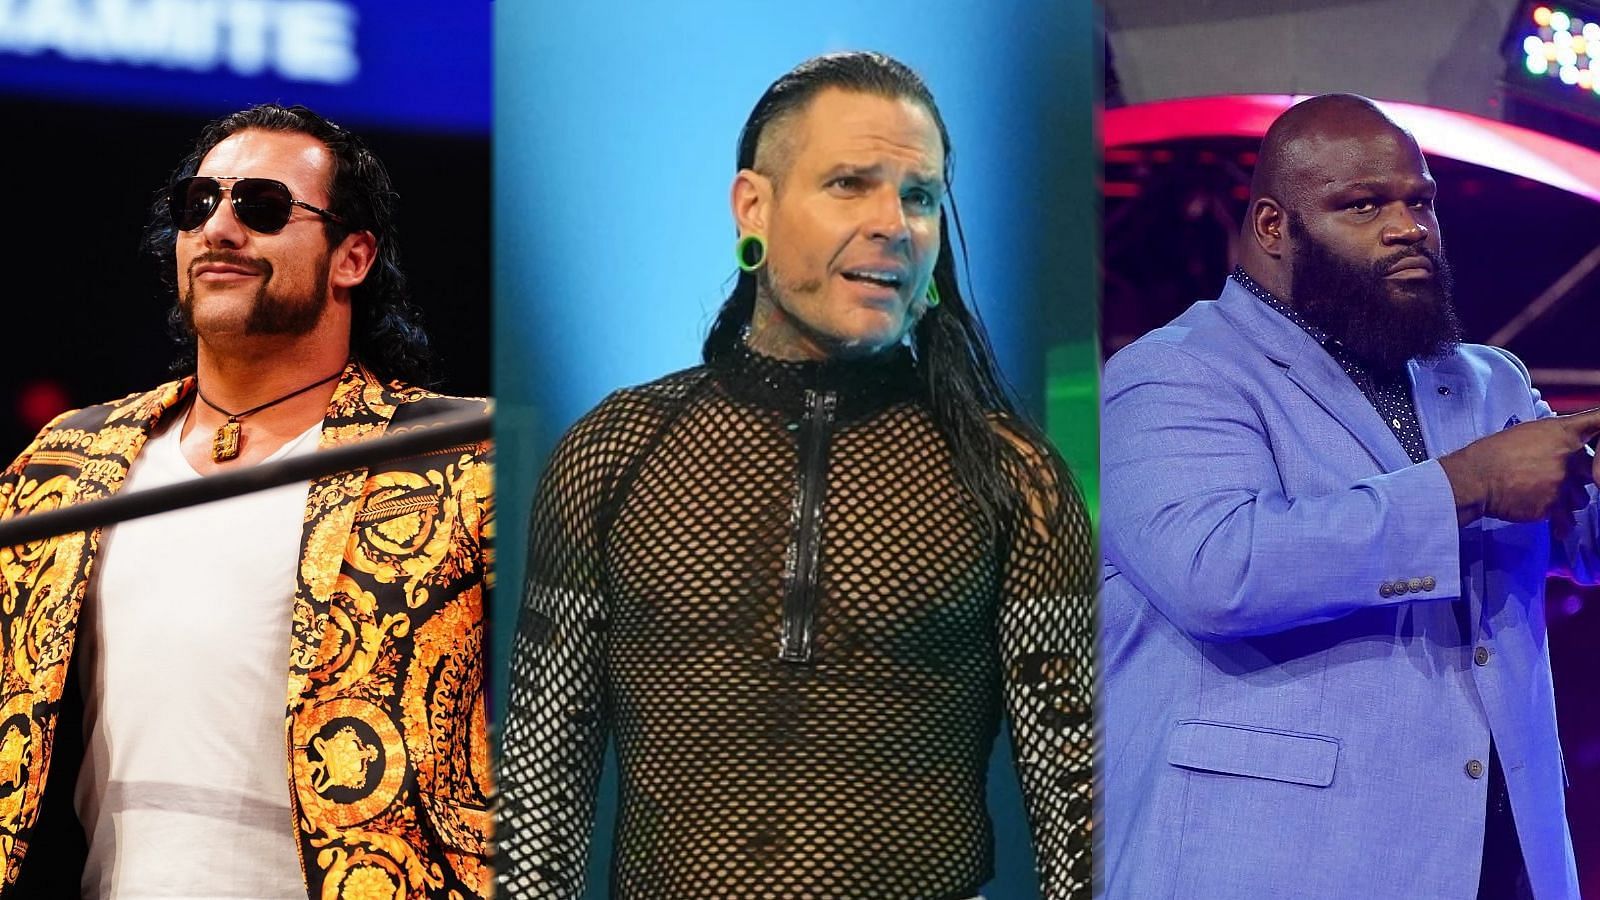 The AEW News Roundup explains some of the biggest stories of the week.